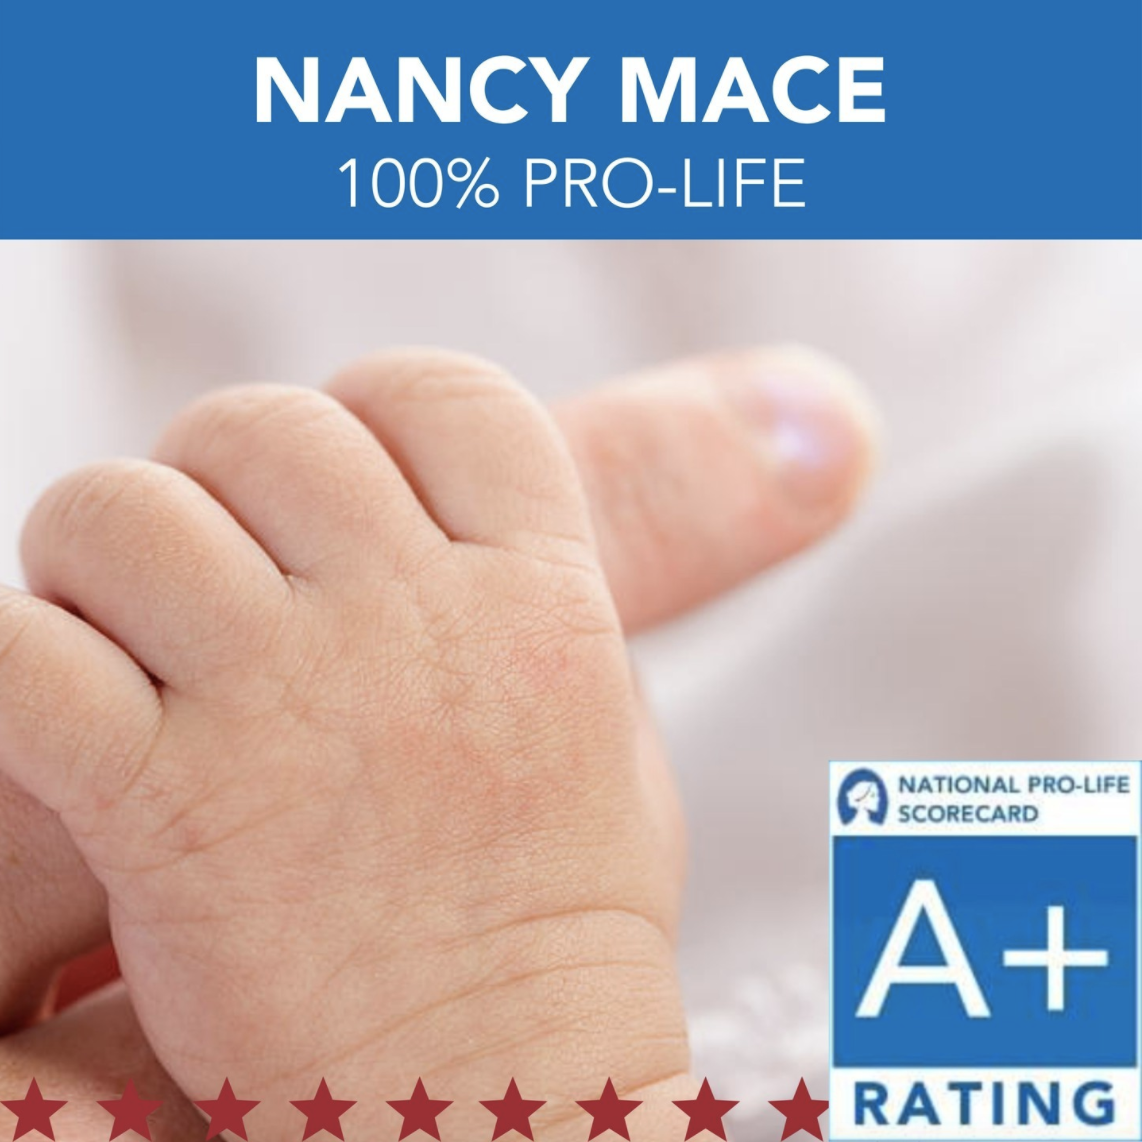 NANCY MACE RECEIVES ENDORSEMENT AND A+ RATING FROM SUSAN B. ANTHONY'S LIST